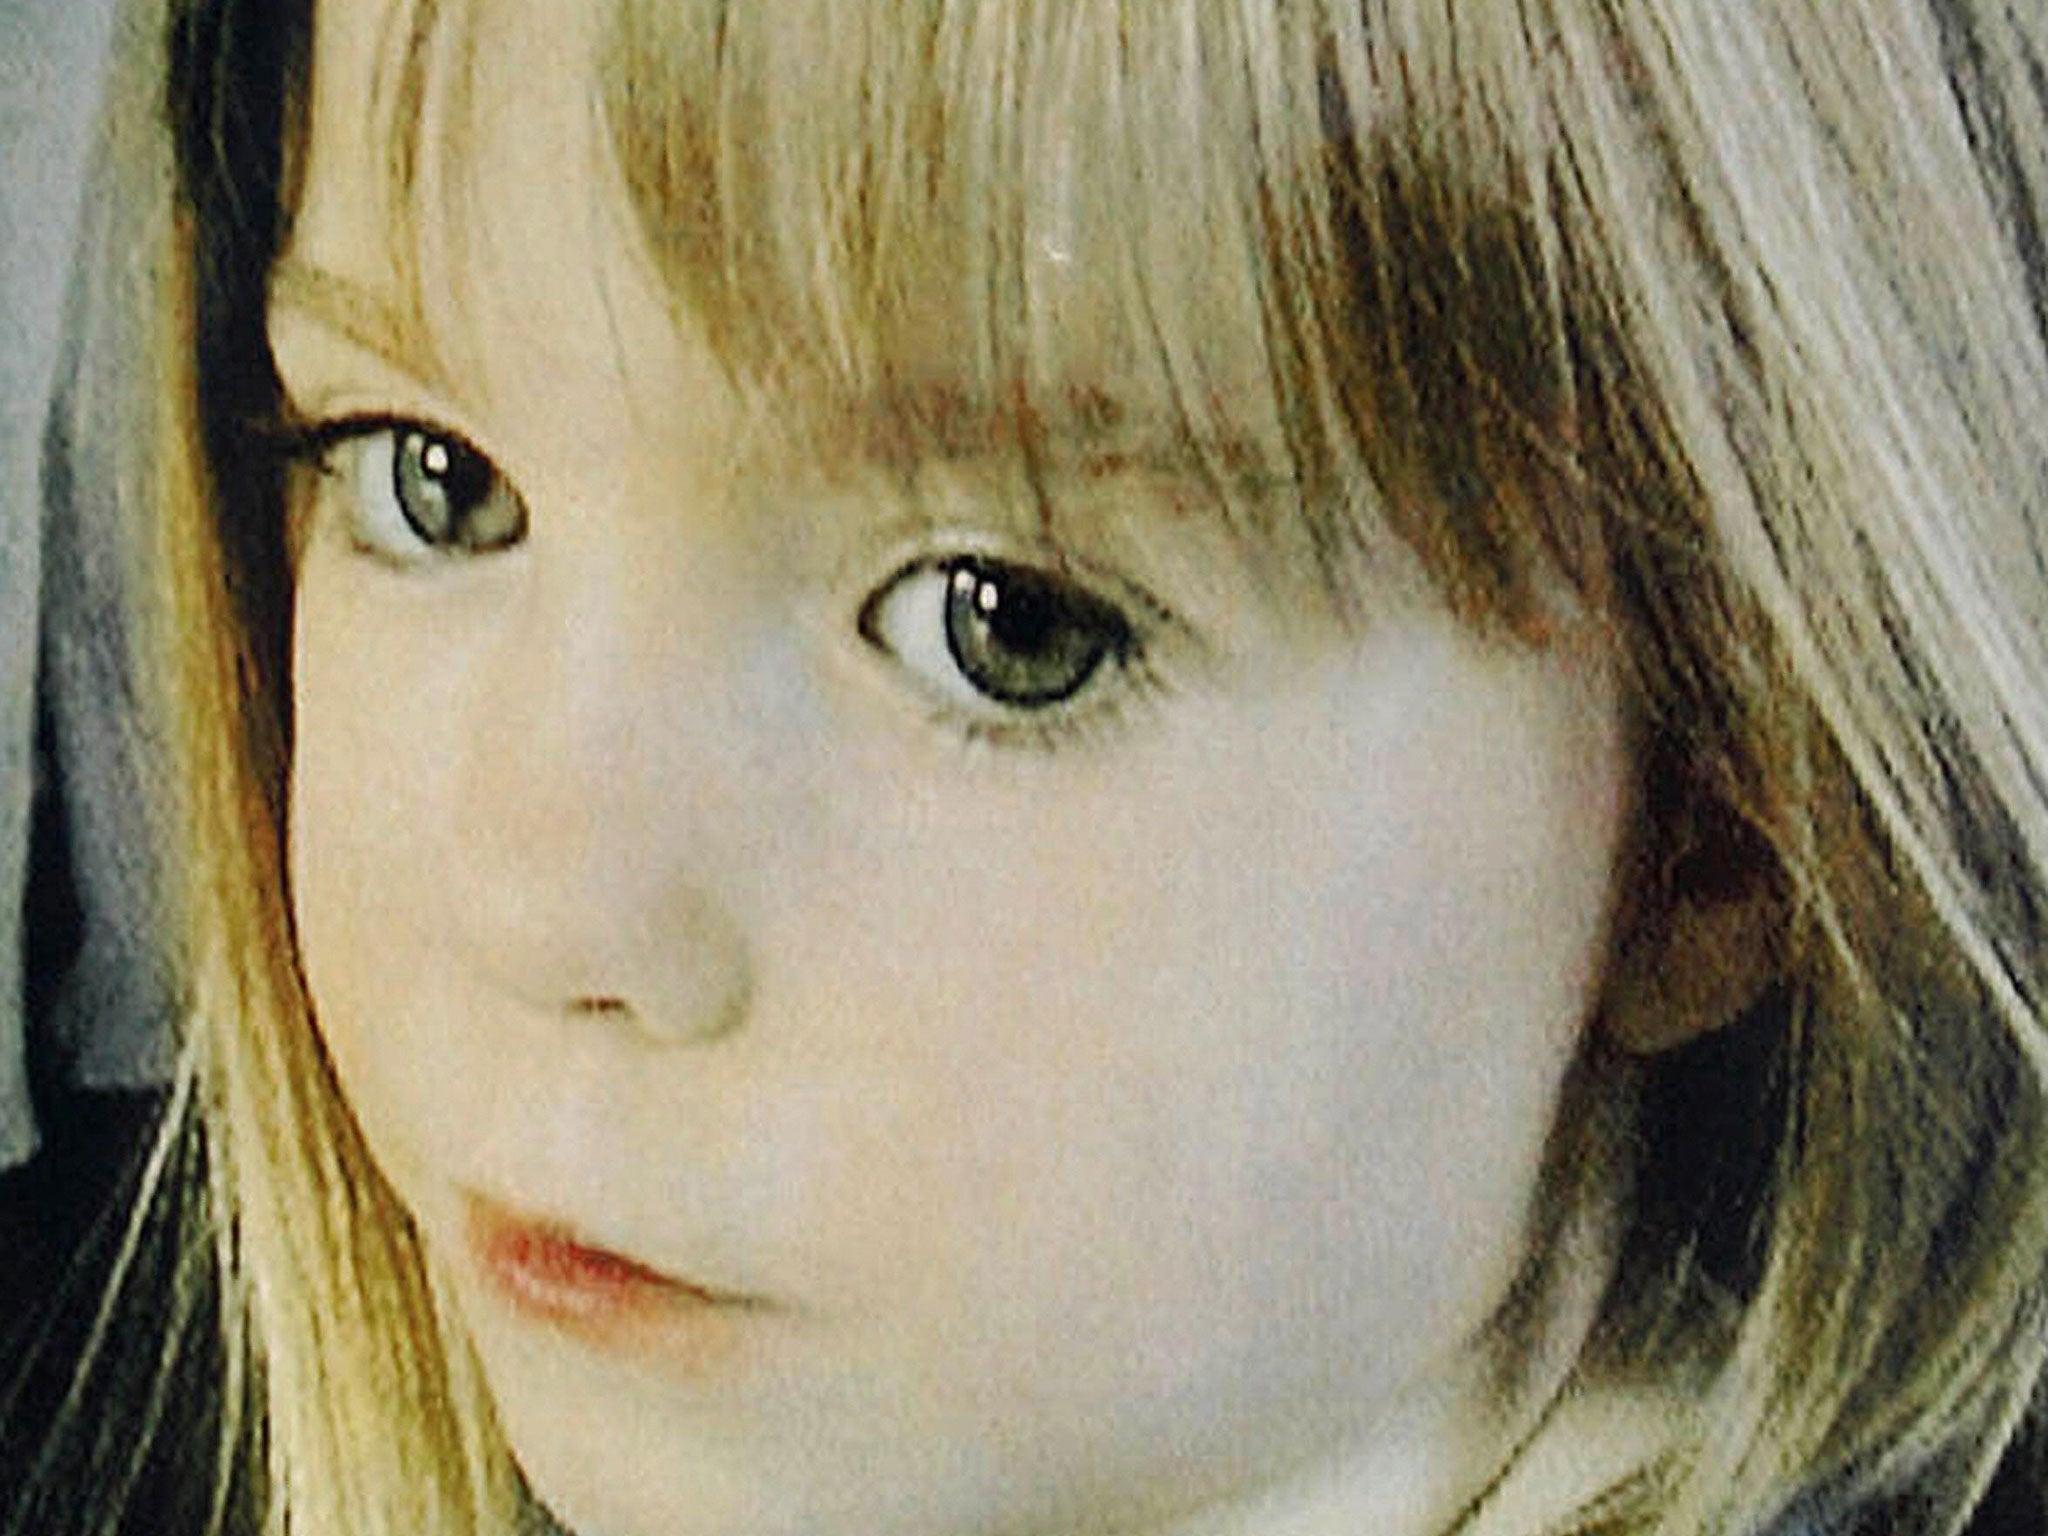 British girl Madeleine McCann, who was allegedy abducted 03 May 2007 from the resort apartment where she was on vacation with her family in the Algarve.